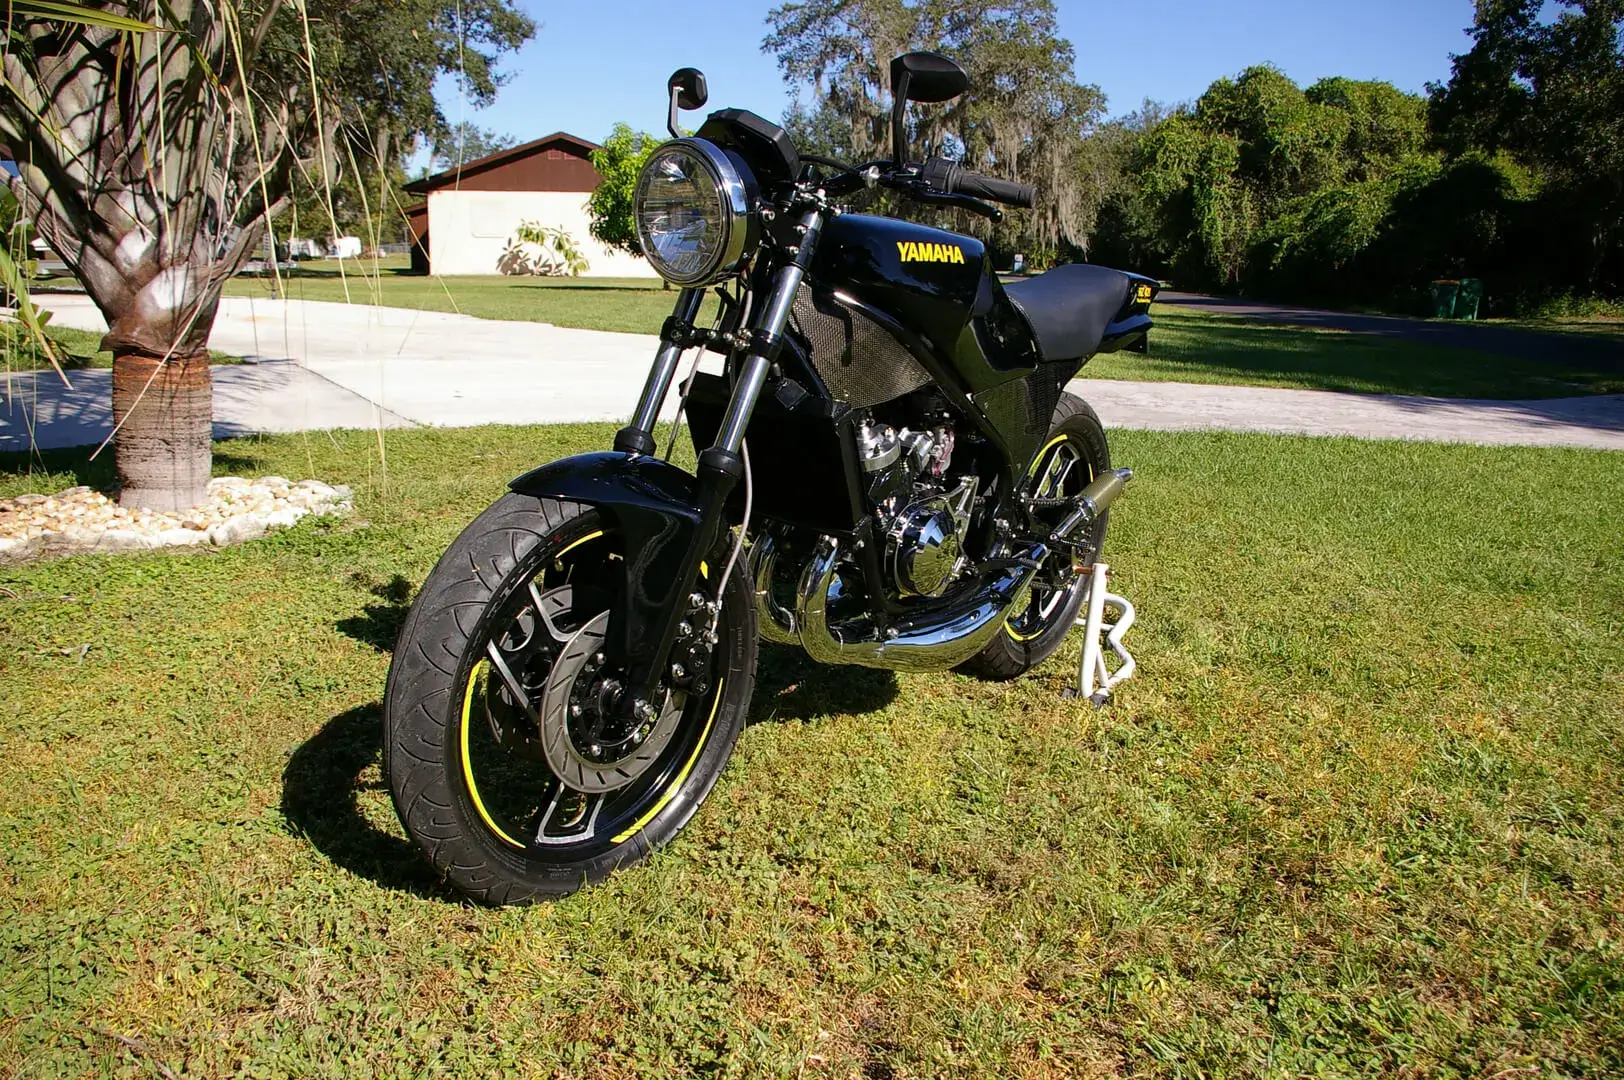 A black motorcycle parked in the grass near some trees.